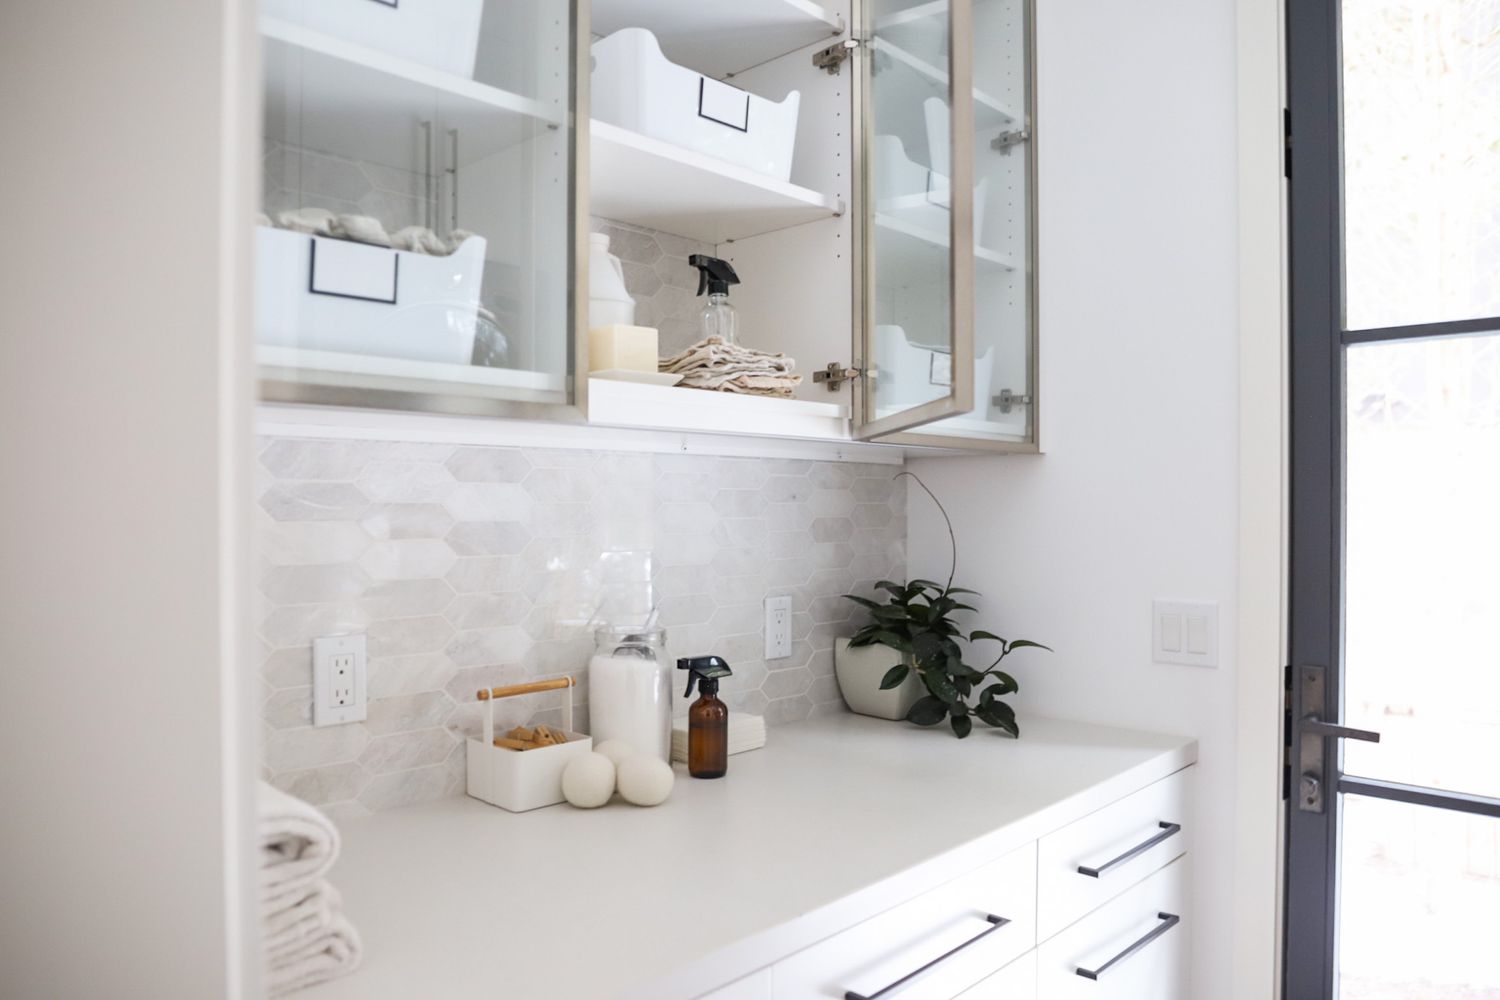 What To Store In Laundry Room Cabinets